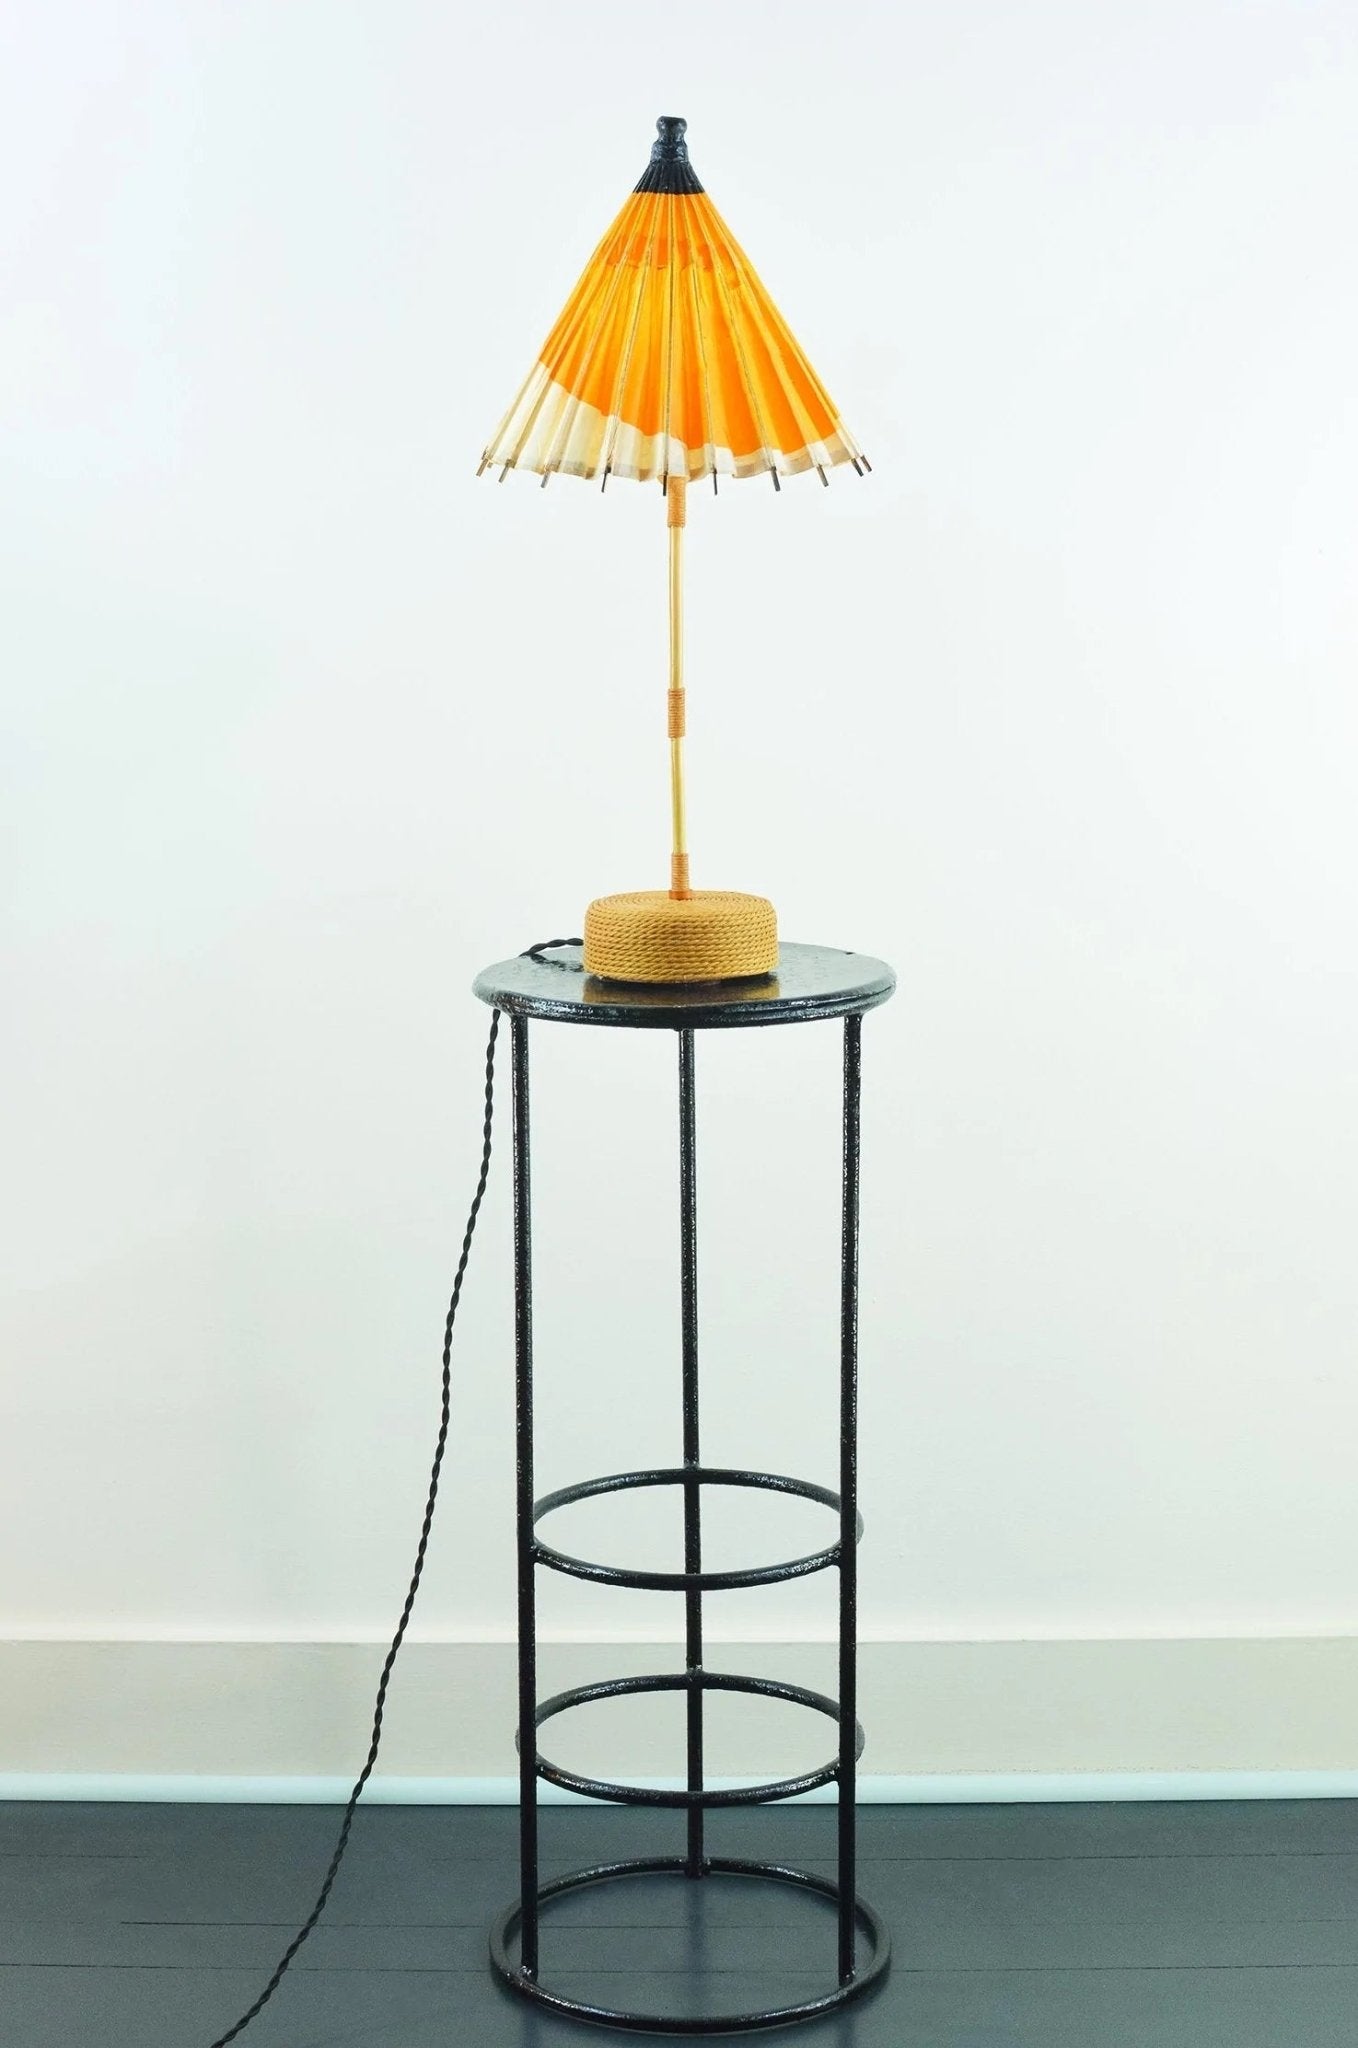 1933 'World's Fair' Bamboo Cocktail Lamp with Parasol Shade and Coiled Seagrass Base — Model No. 004A - Tennant New York